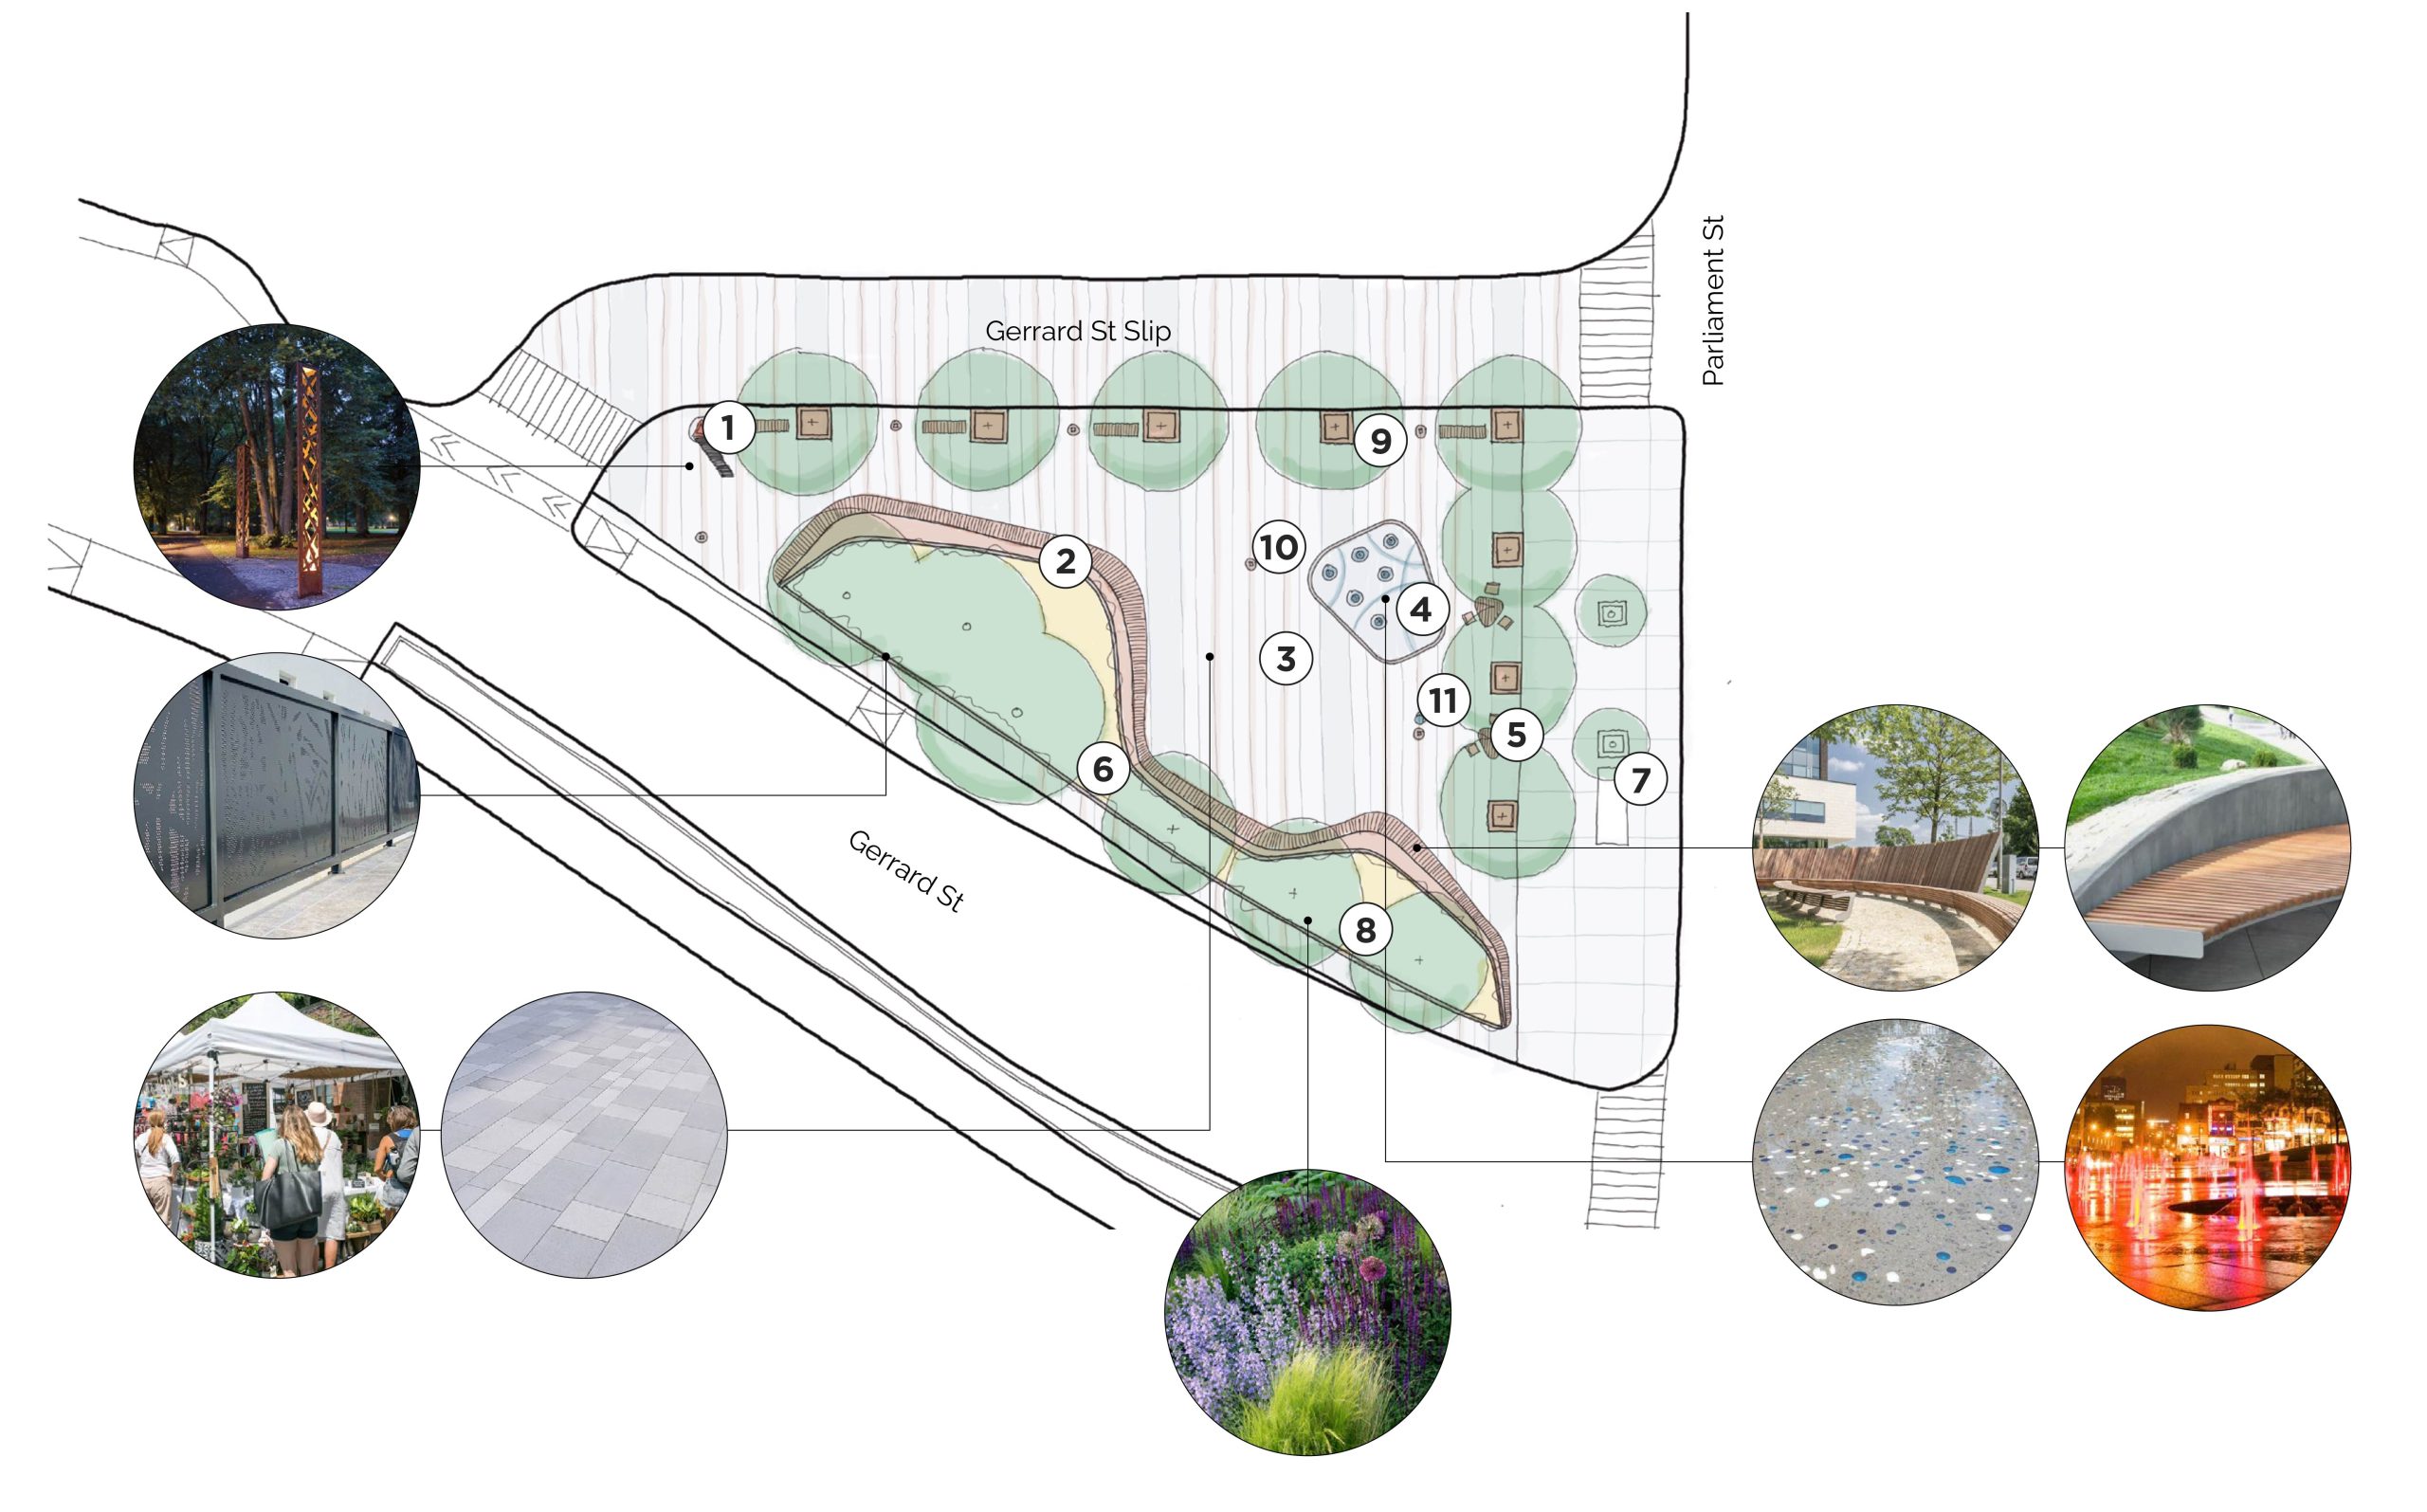 The image shows design option 2 for the revitalized Anniversary Park. It has a curvilinear form along the south side of the site. There is a water feature on the Northeast side of the site and is open to both Gerrard Slip Lane and Parliament Street.